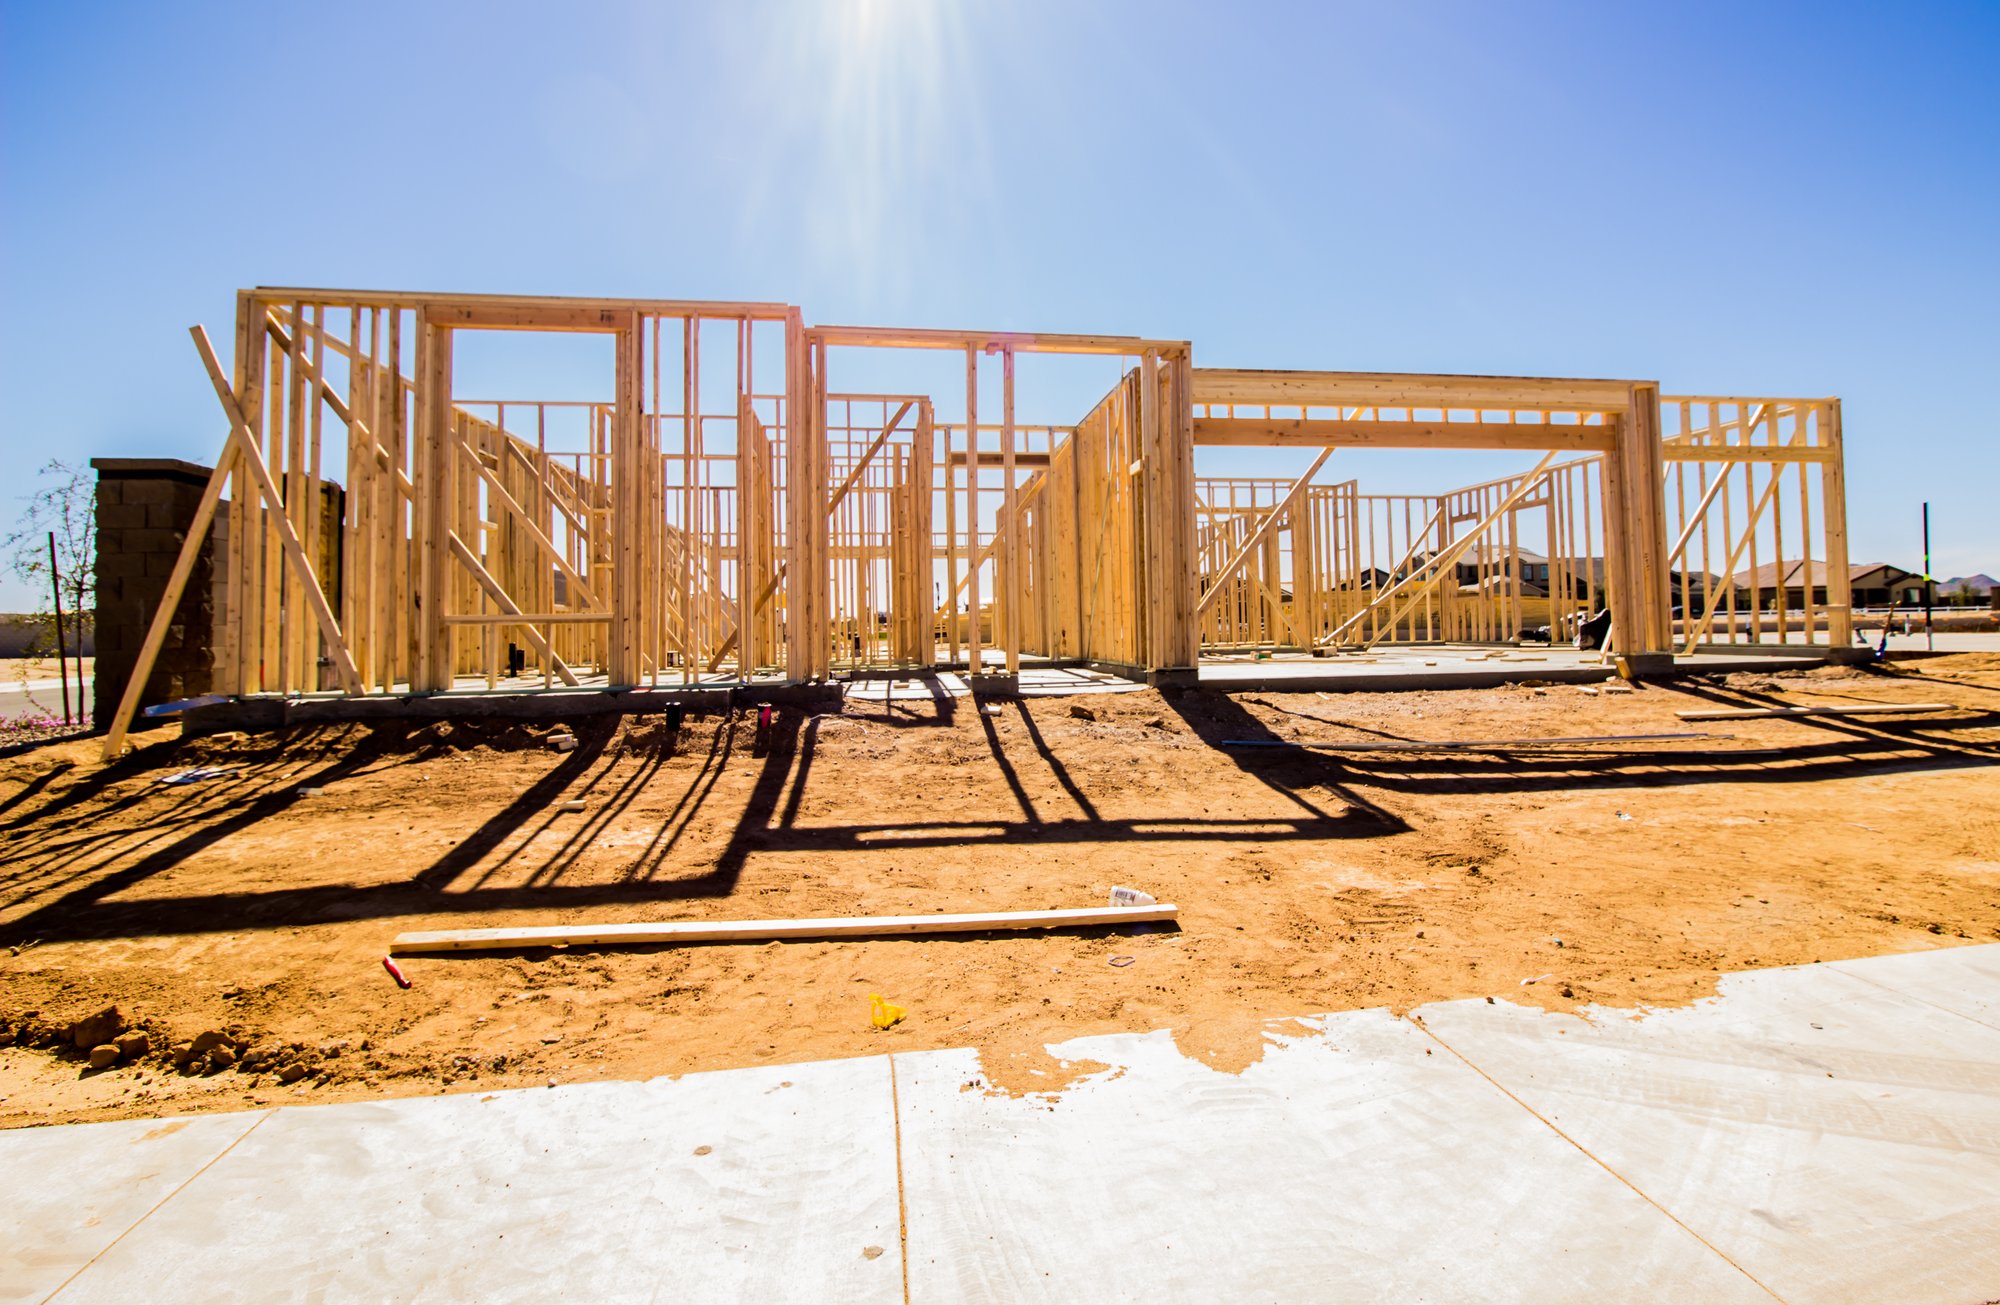 vecteezy_new-home-construction-in-framing-stage_14324856